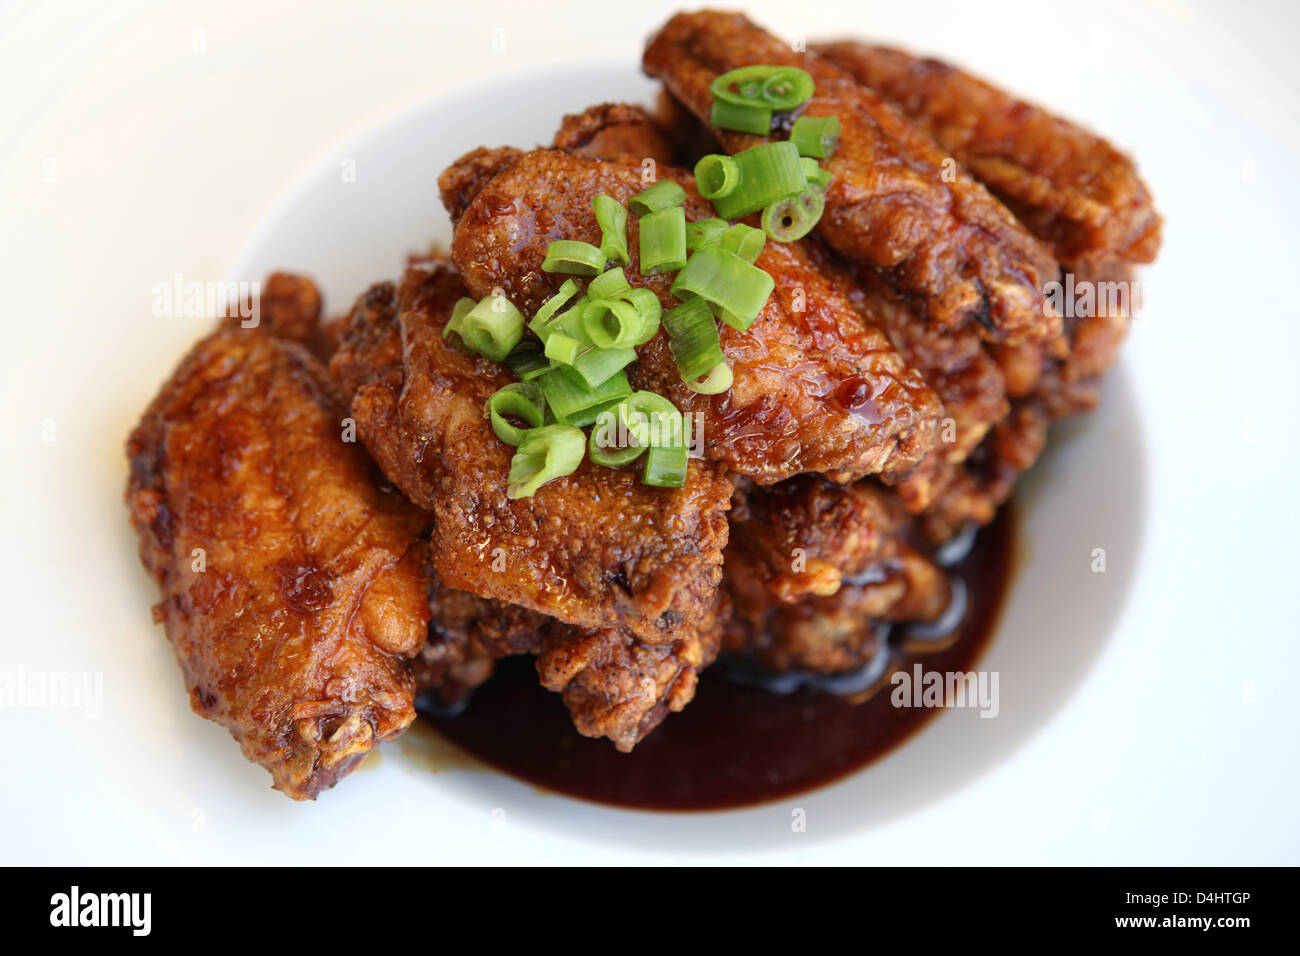 Barbecued chicken wings with sauce Stock Photo